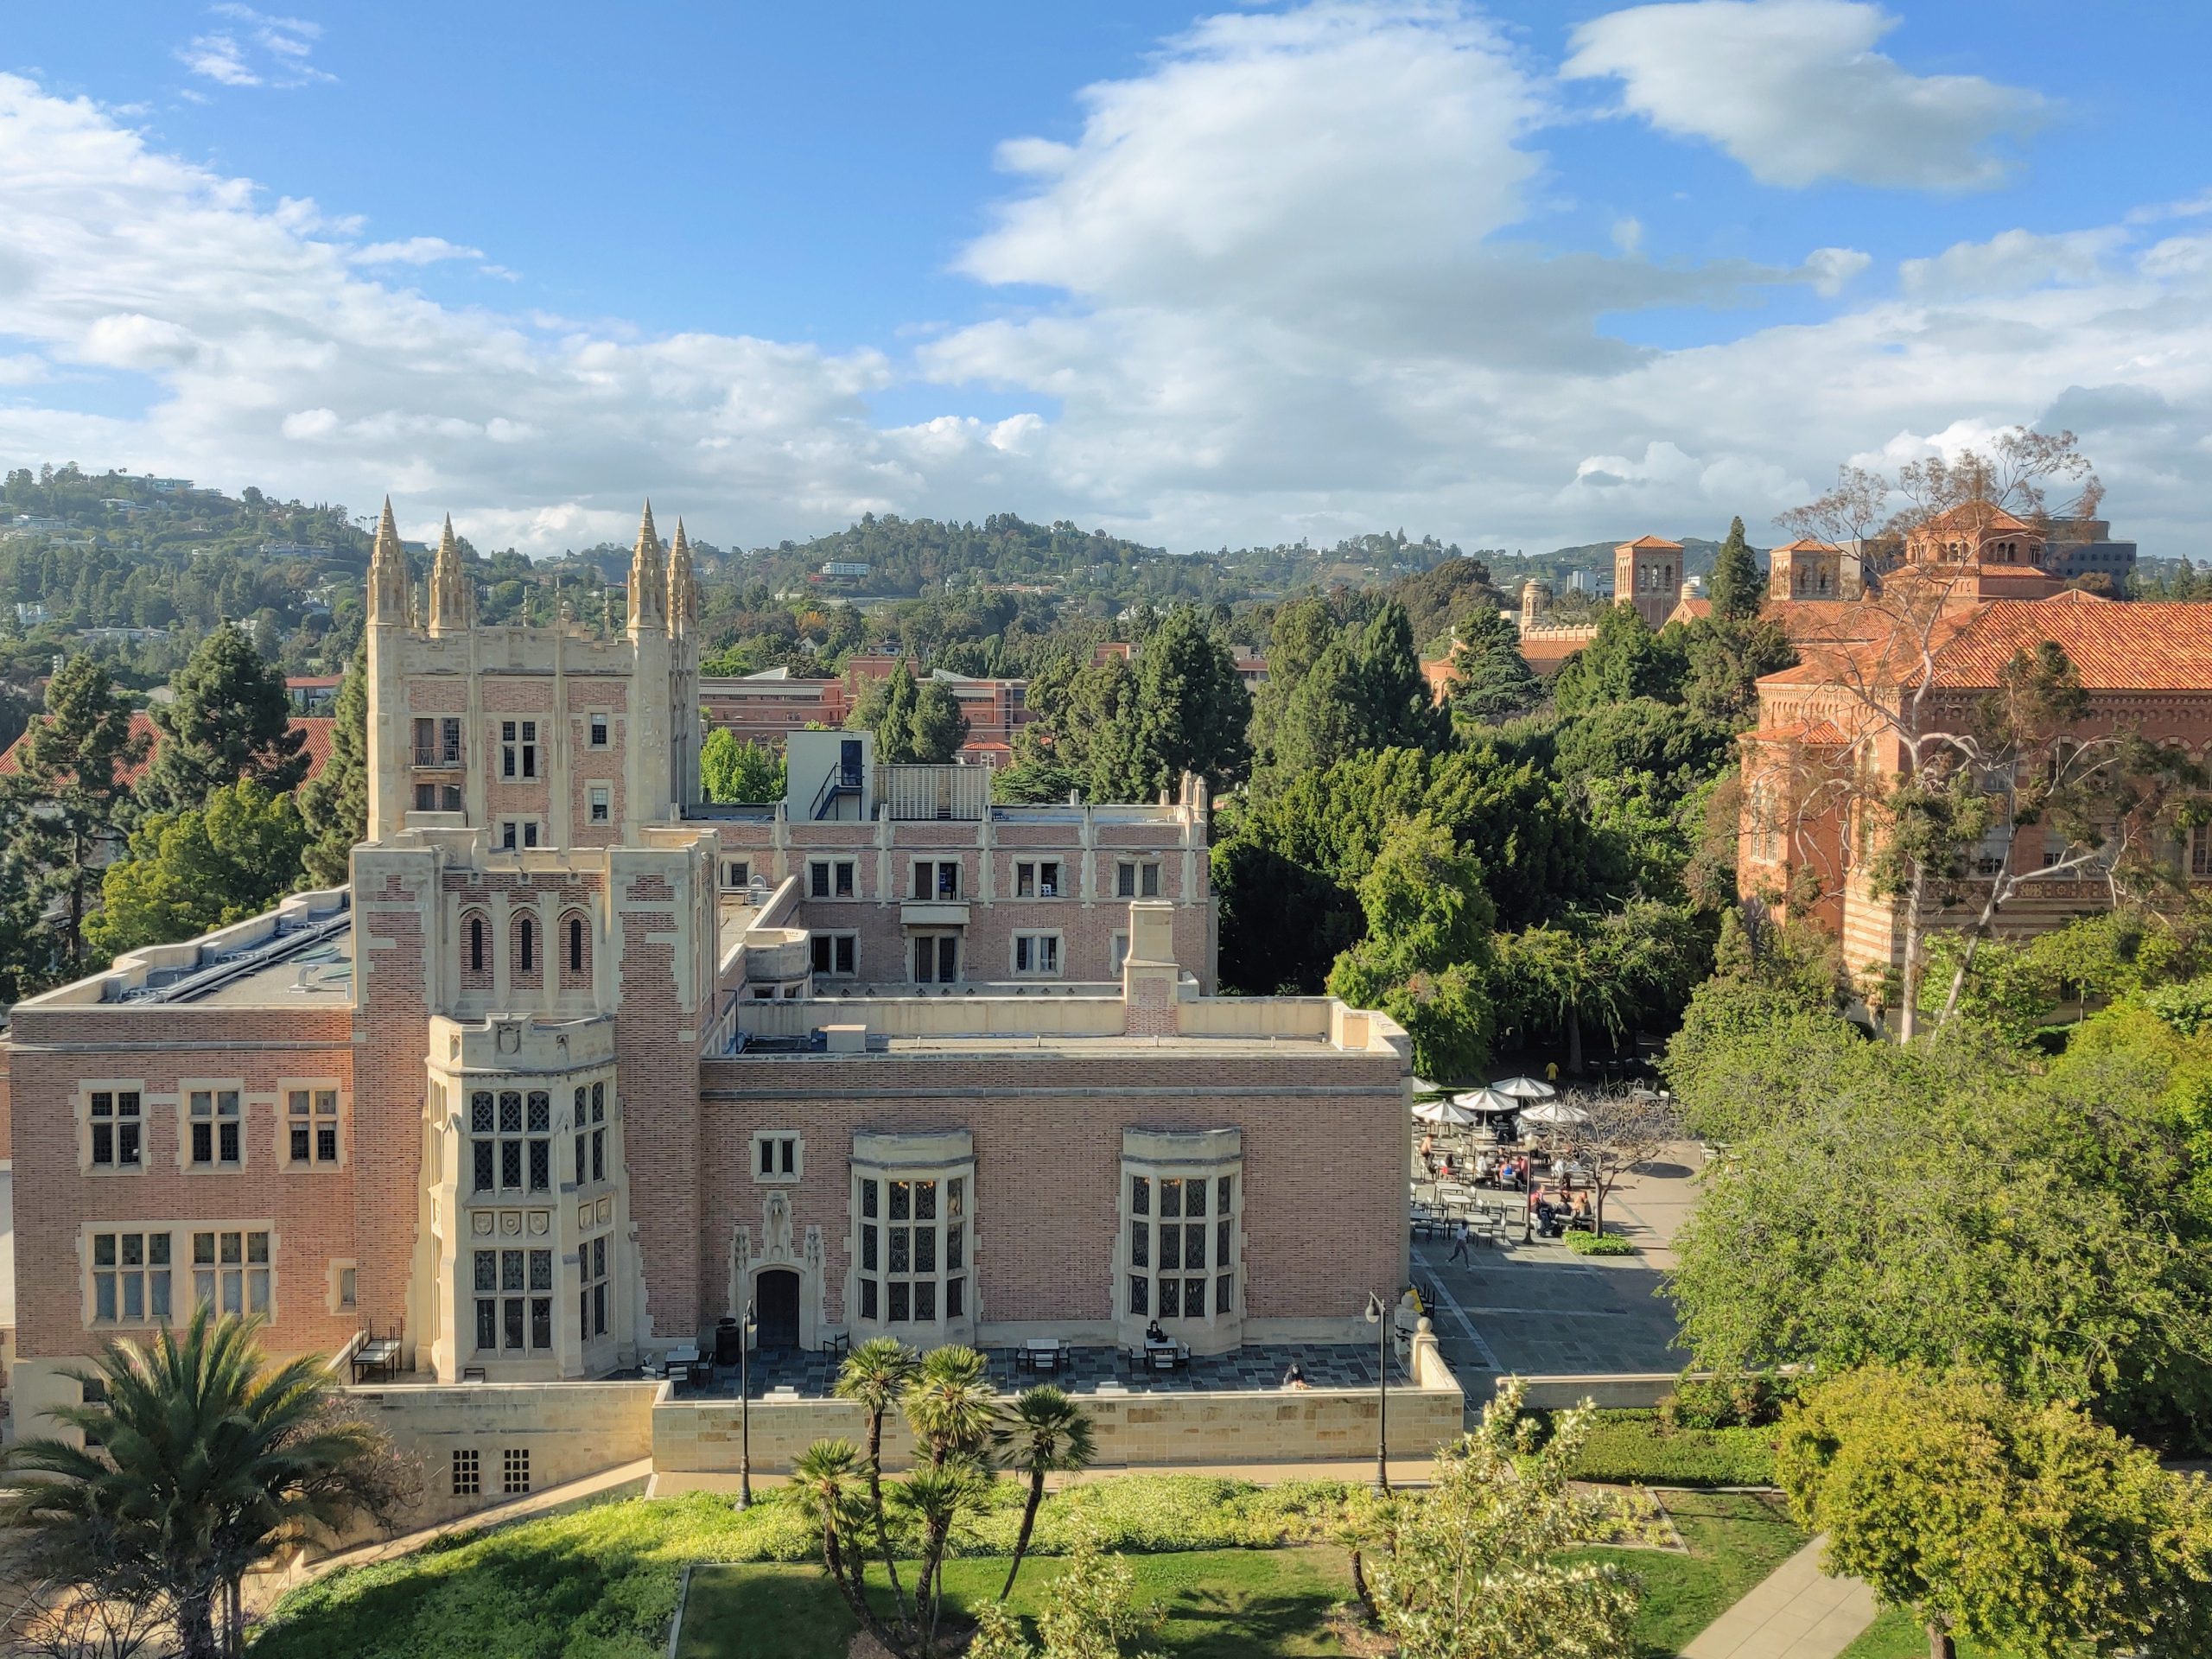 A scenic overhead view of the UCLA campus showing Kerckhoff Hall in the foreground and the hills of Los Angeles in the background.